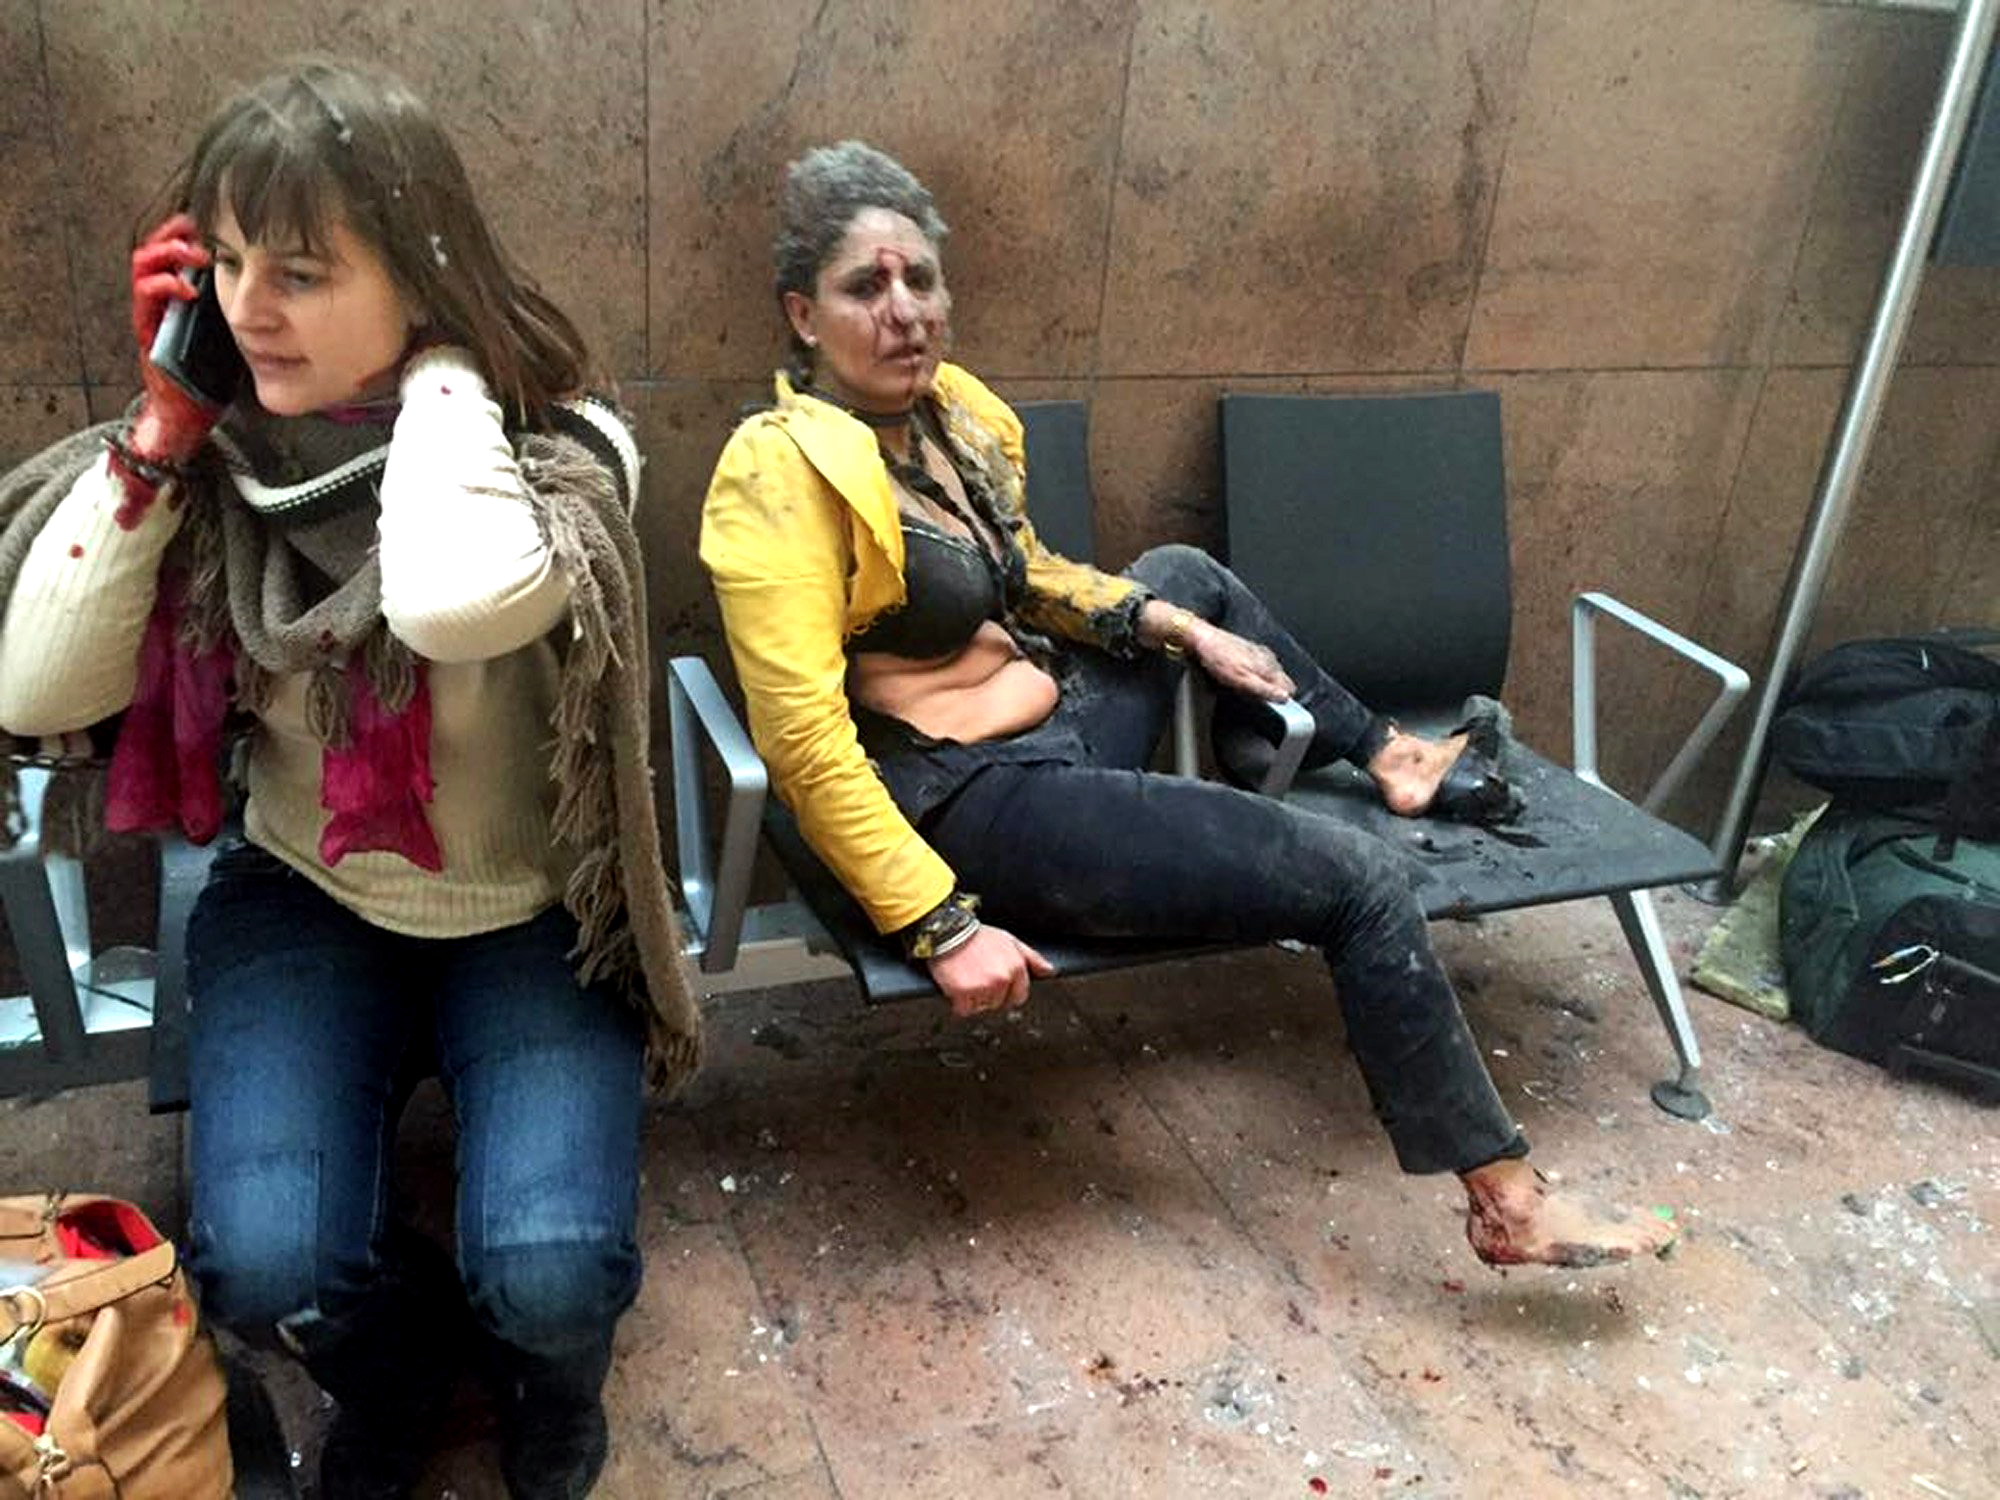 In this photo provided by Georgian Public Broadcaster and photographed by Ketevan Kardava, two women are wounded in Brussels Airport in Belgium after explosions were heard on March 22, 2016.